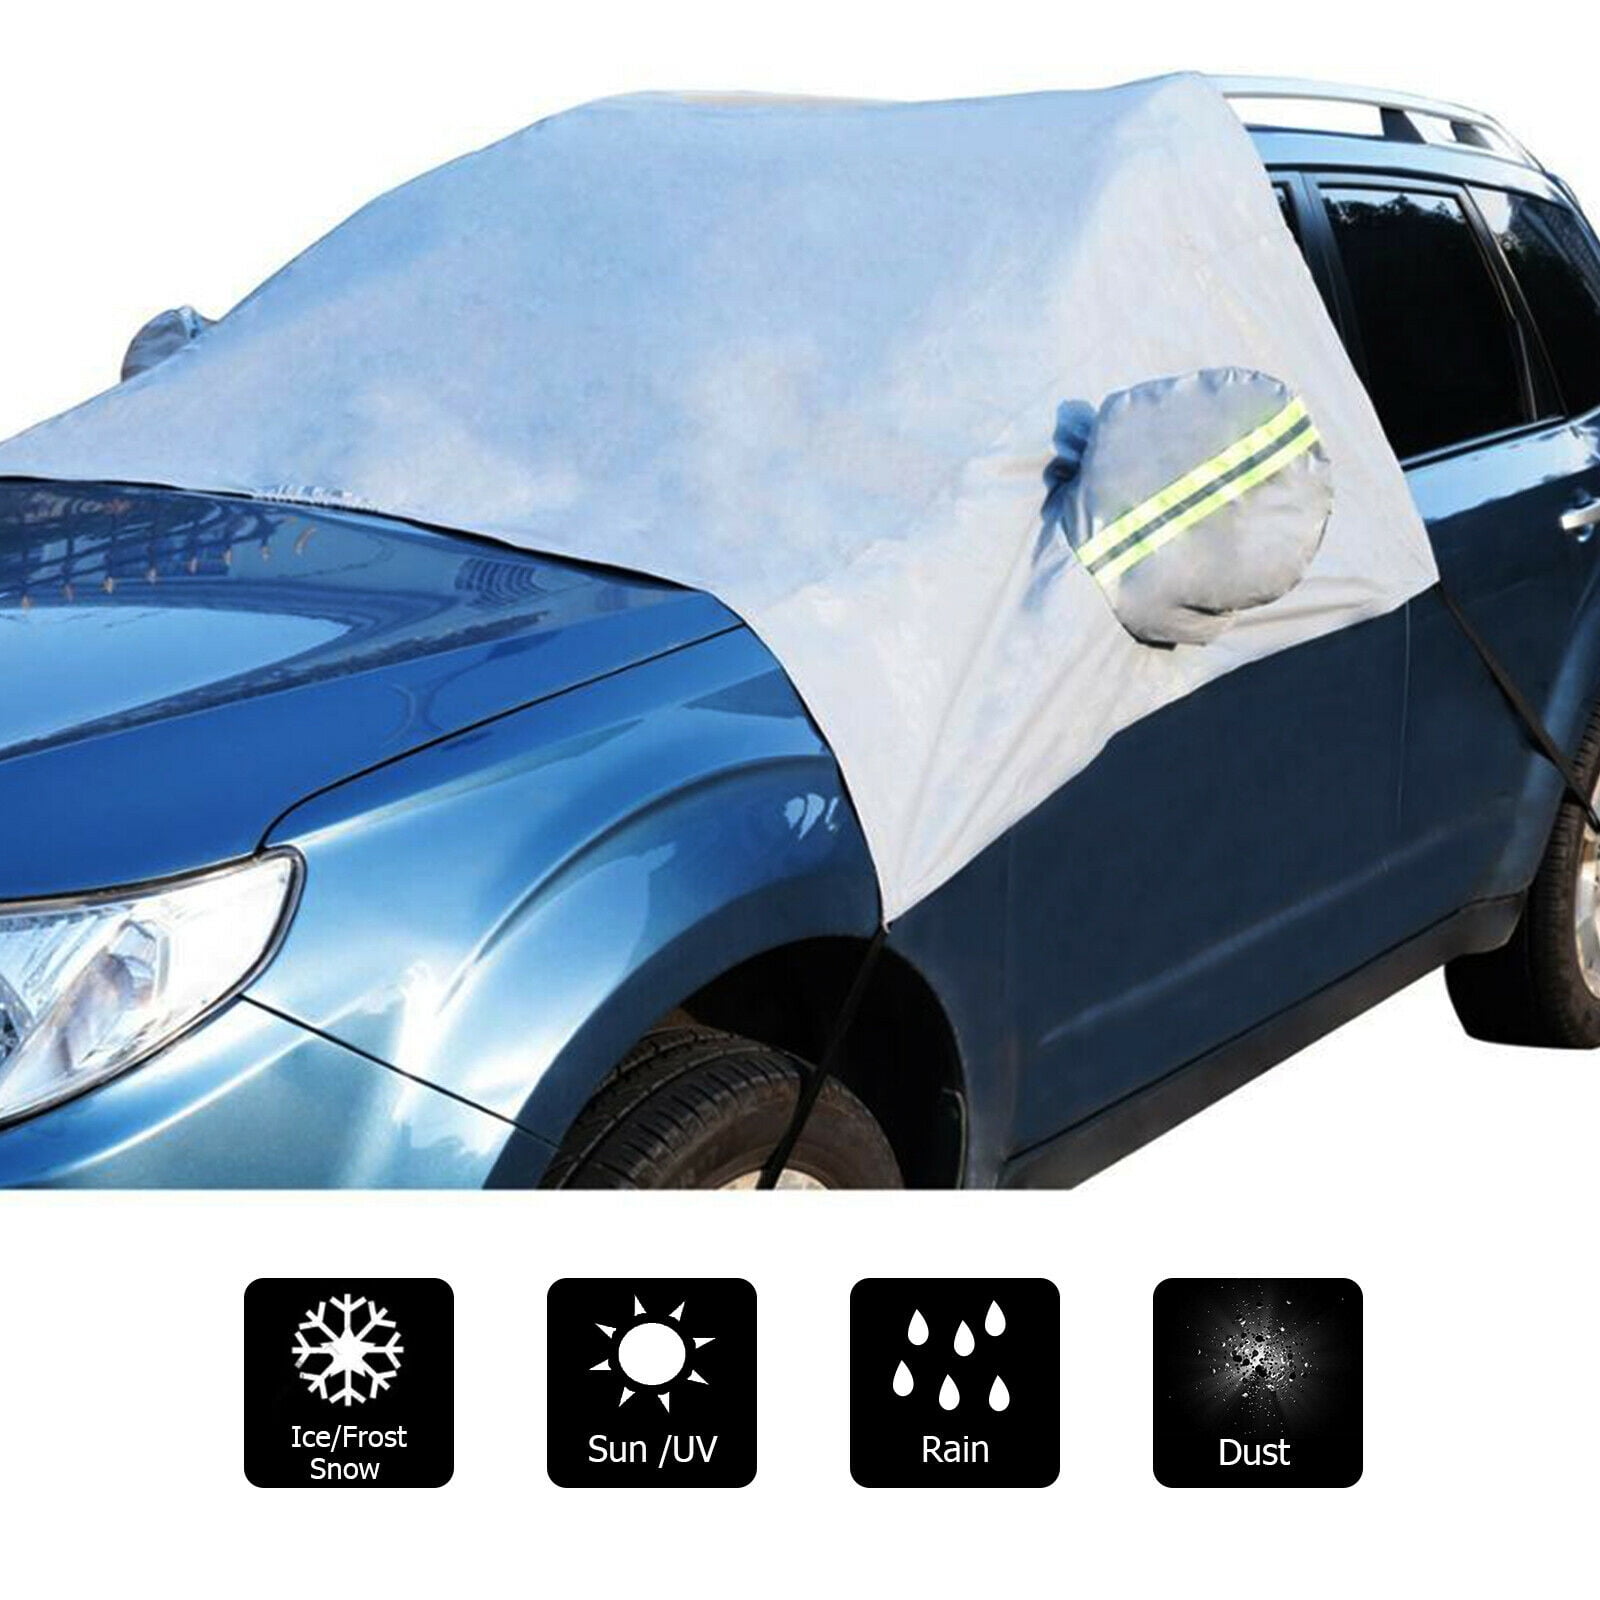 Melt it! E·Z·R Windshield De-Icer. Instantly Melts Ice & Winter Frost for  Car Windshields, Windows, Mirrors, Key Locks, & Latches, Snow Melting